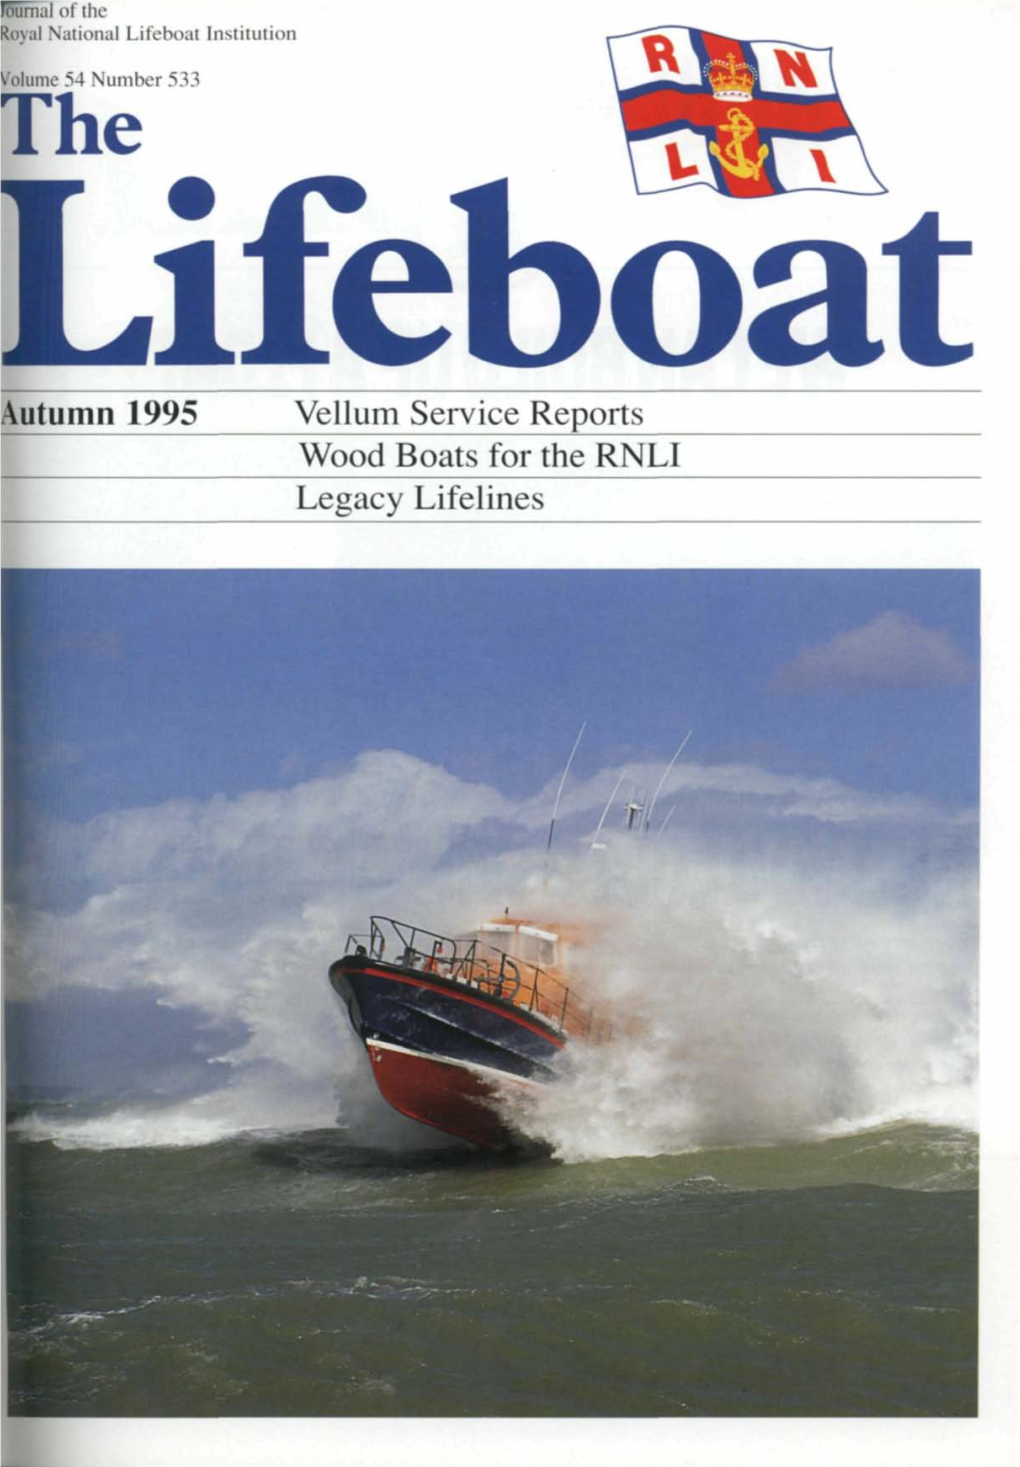 Vellum Service Reports Wood Boats for the RNLI Legacy Lifelines WITHENOUGHOFTHESE